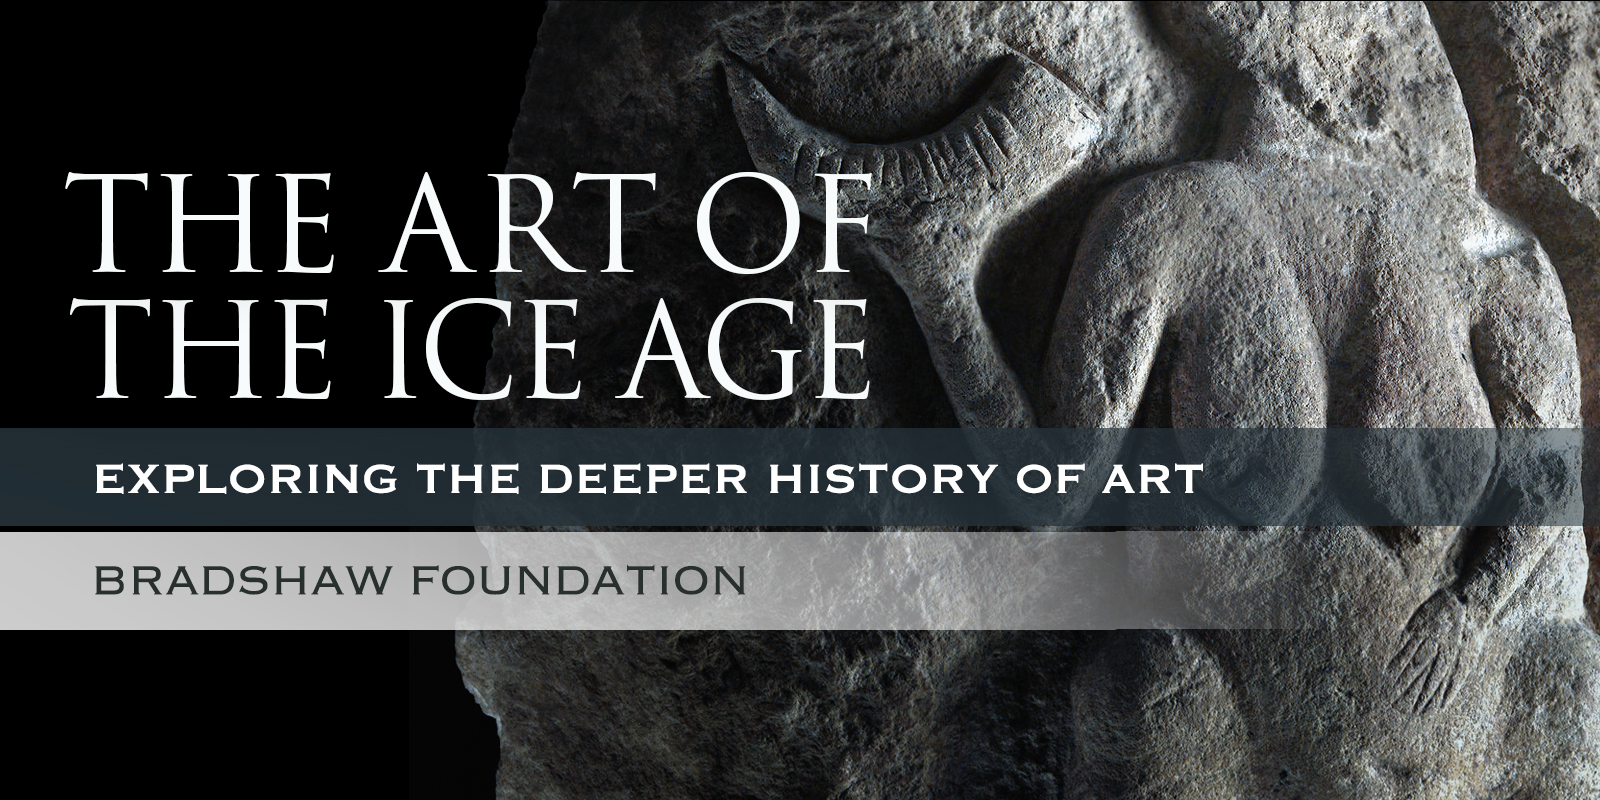 Sculptures of the Ice Age Exploring the Deeper History of Art Bradshaw Foundation